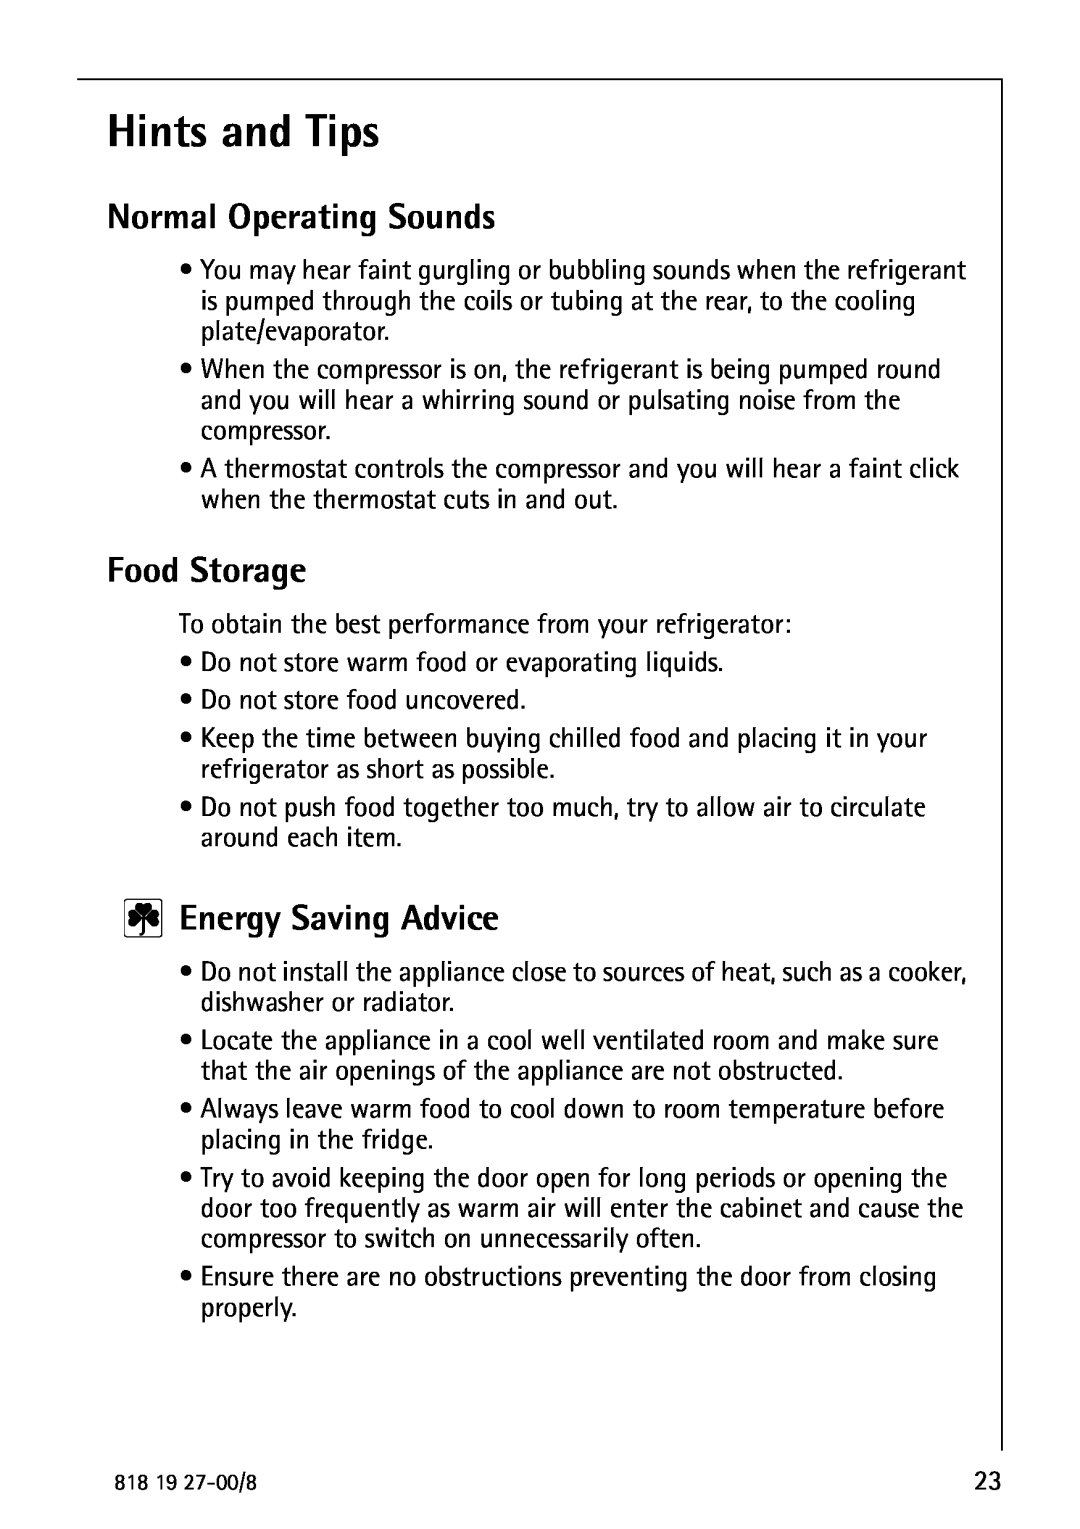 Electrolux Upright Refrigerator manual Hints and Tips, Normal Operating Sounds, Food Storage, Energy Saving Advice 